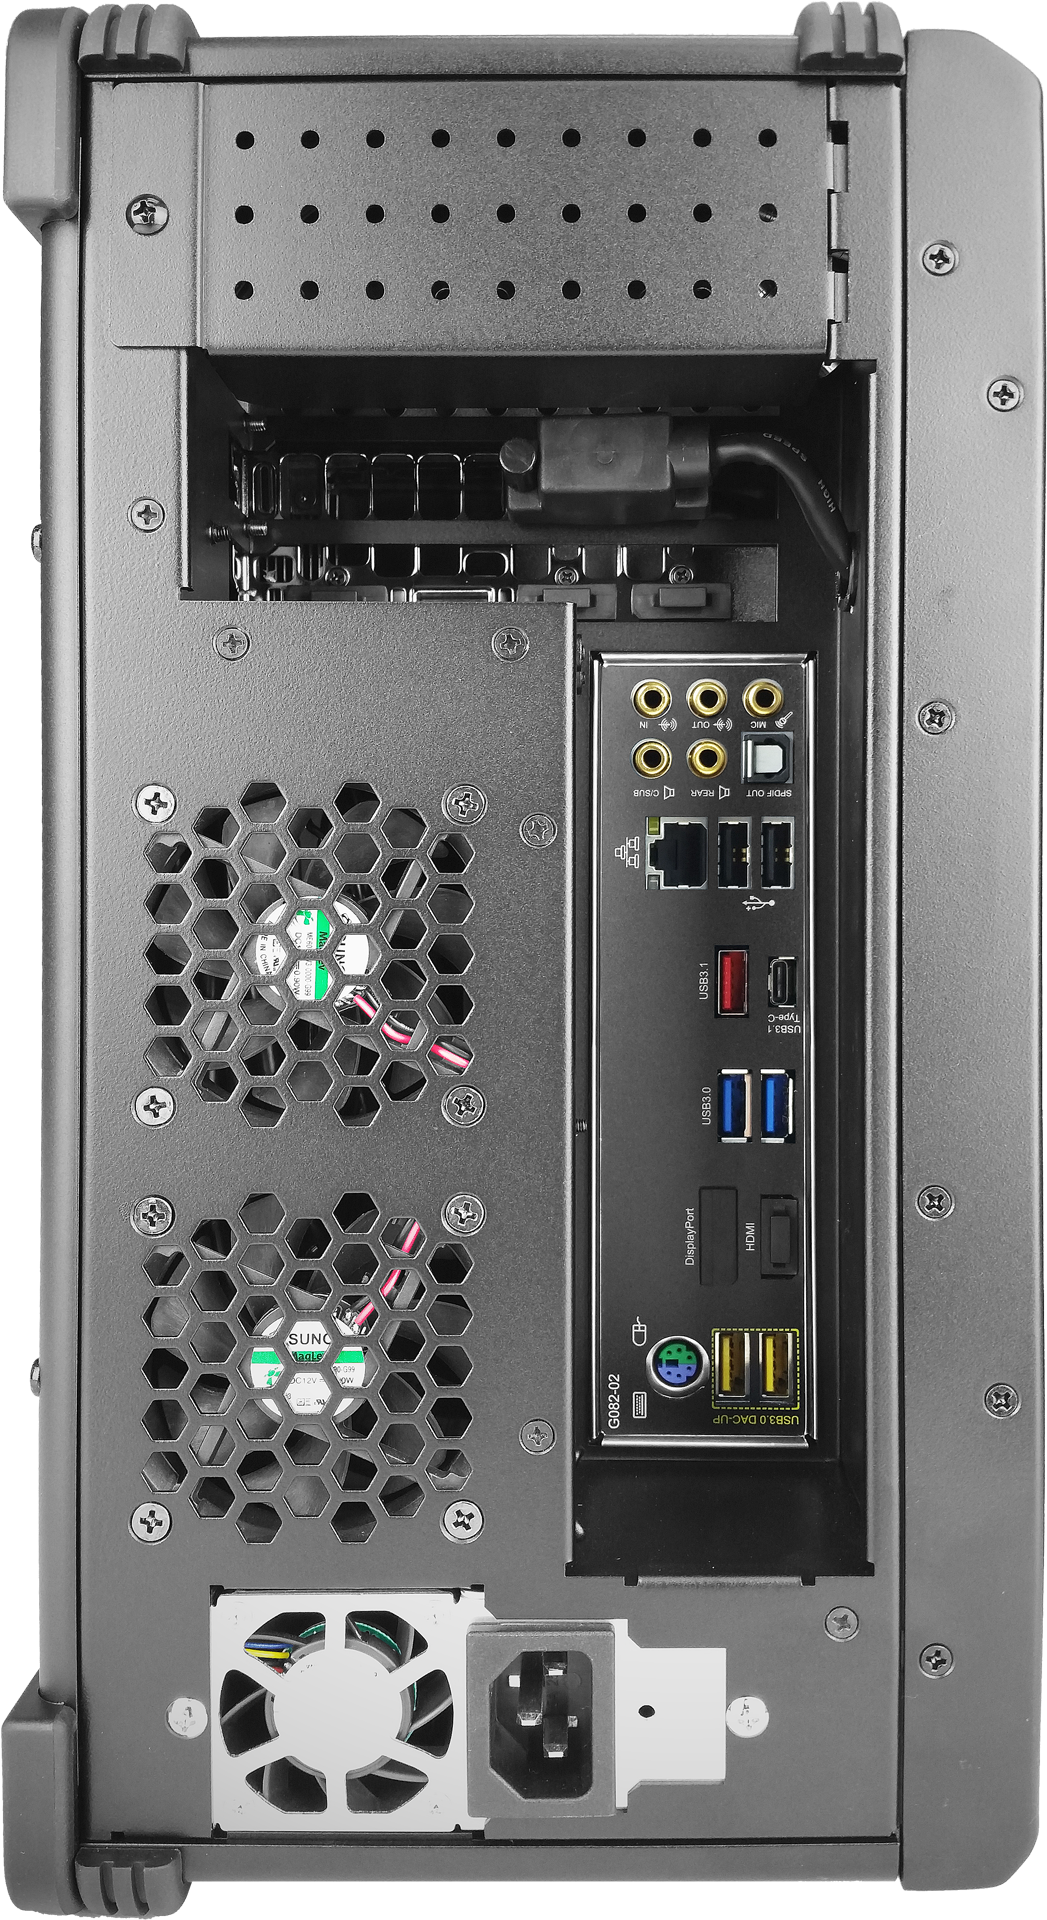 Computer Rear Panel Connectivity Ports